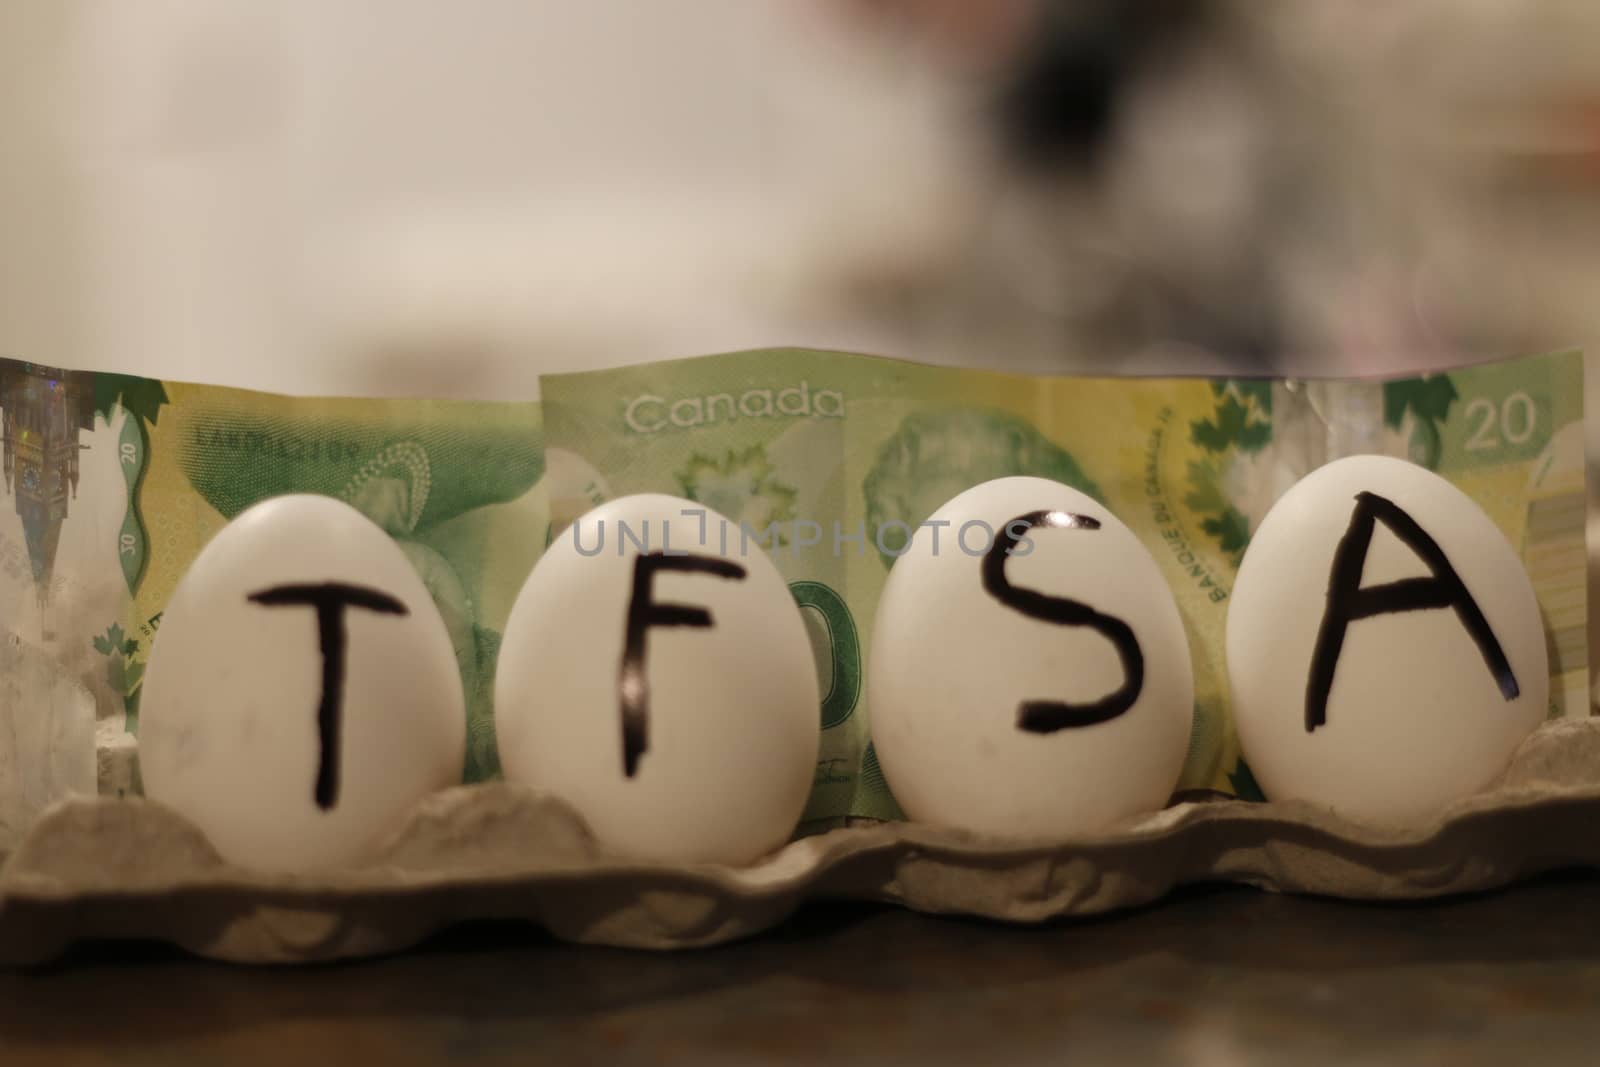 TFSA limit is 6000 dollars per year in canada, theme of investments.